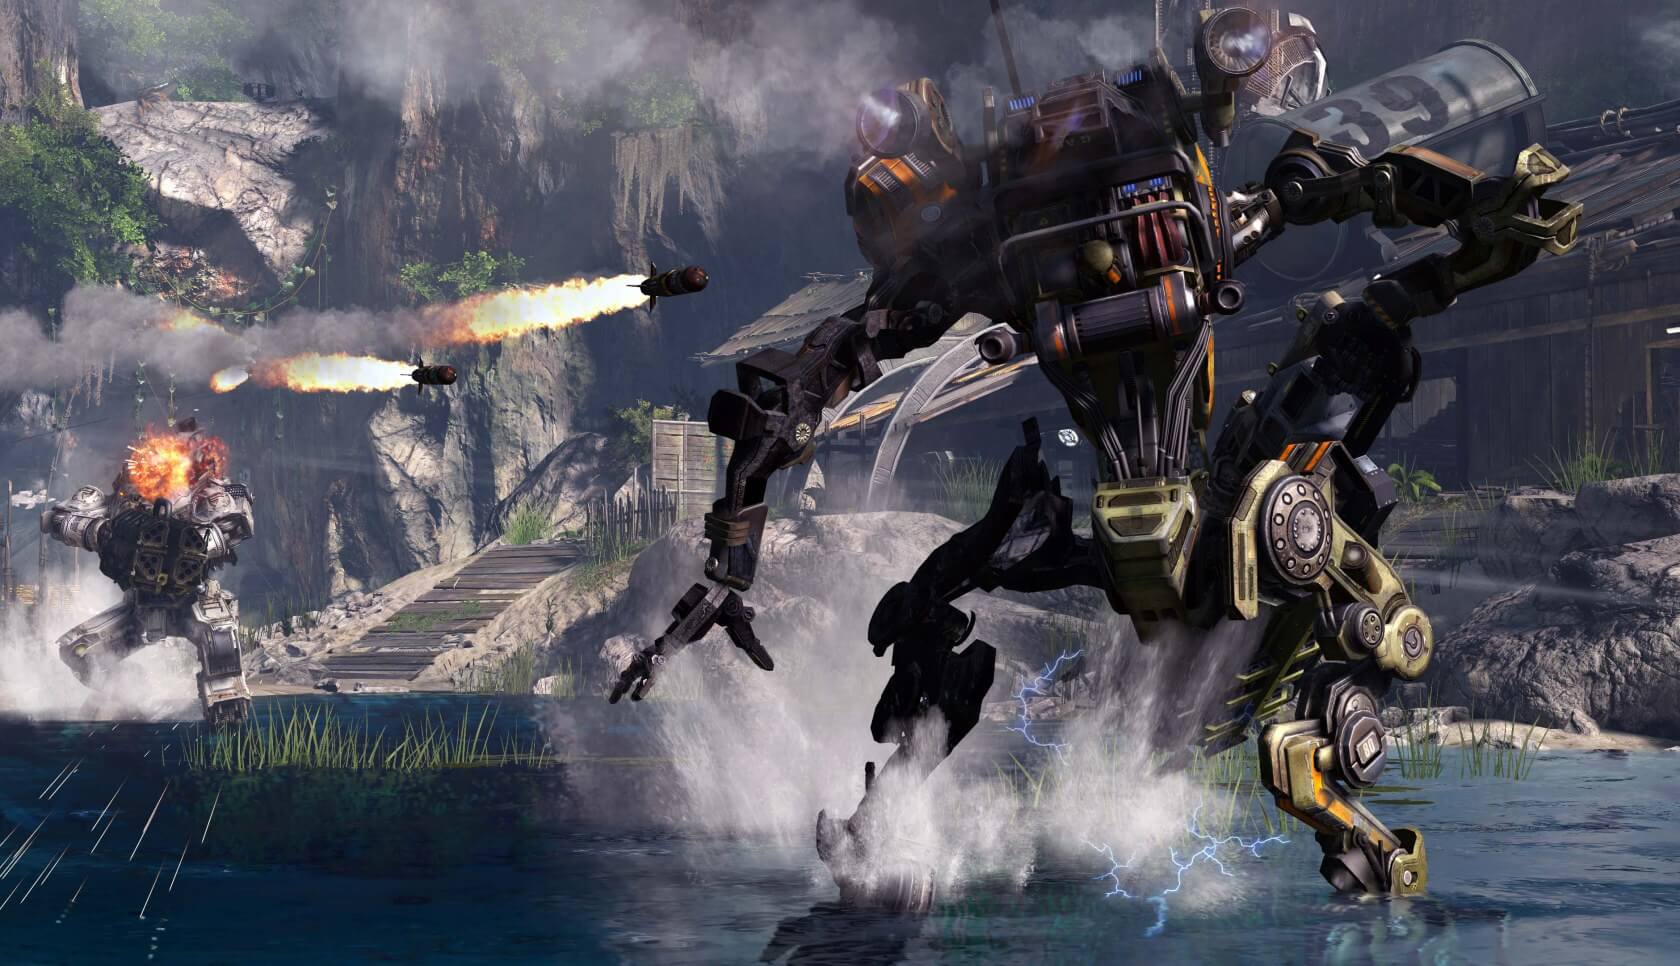 The Titanfall series isn't dead, says publisher EA